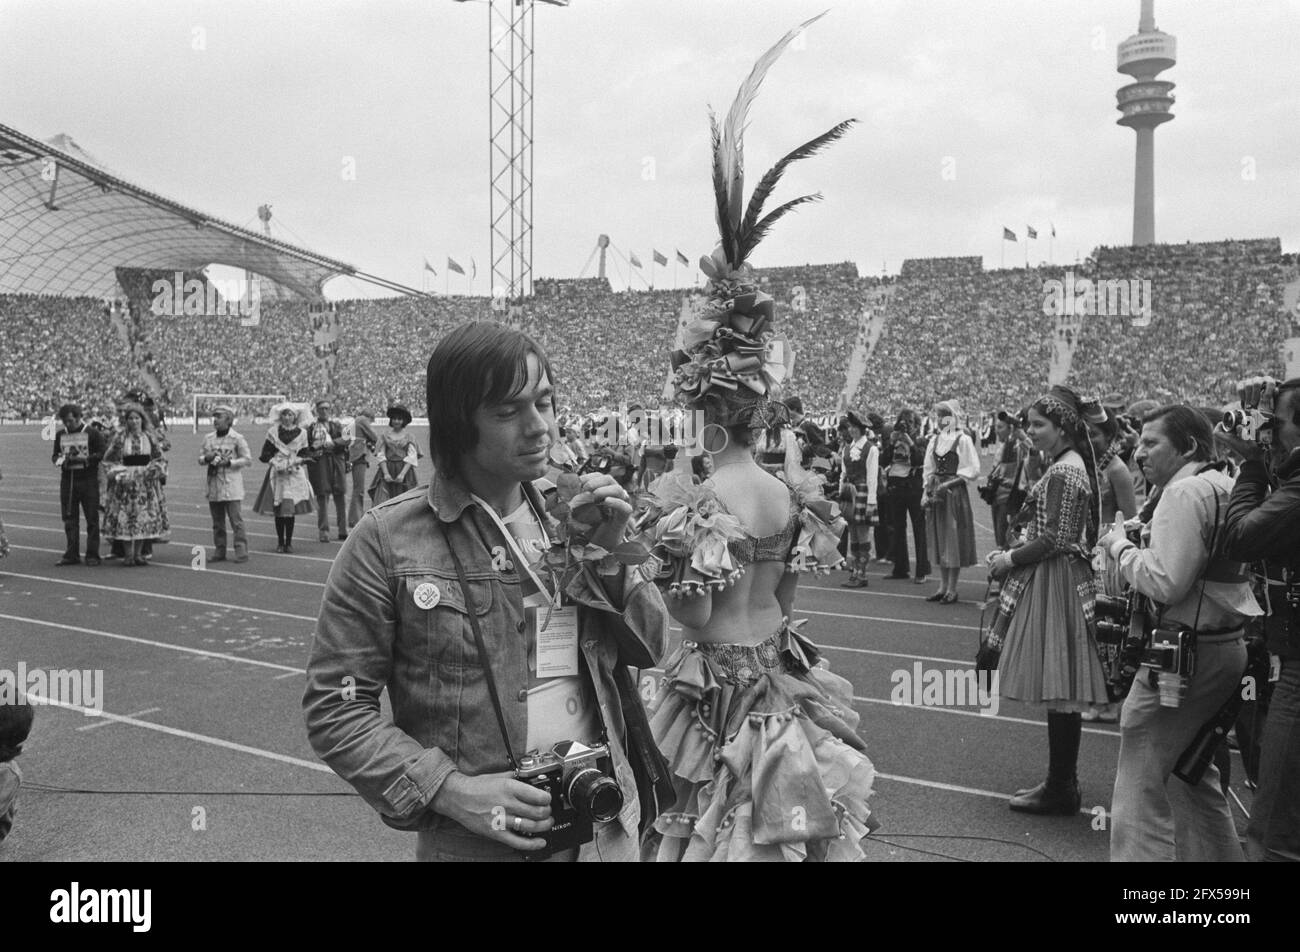 World Cup final 1974 in Munich, West Germany v Netherlands 2-1; closing ceremony, July 7, 1974, finals, sports, soccer, world championships, The Netherlands, 20th century press agency photo, news to remember, documentary, historic photography 1945-1990, visual stories, human history of the Twentieth Century, capturing moments in time Stock Photo